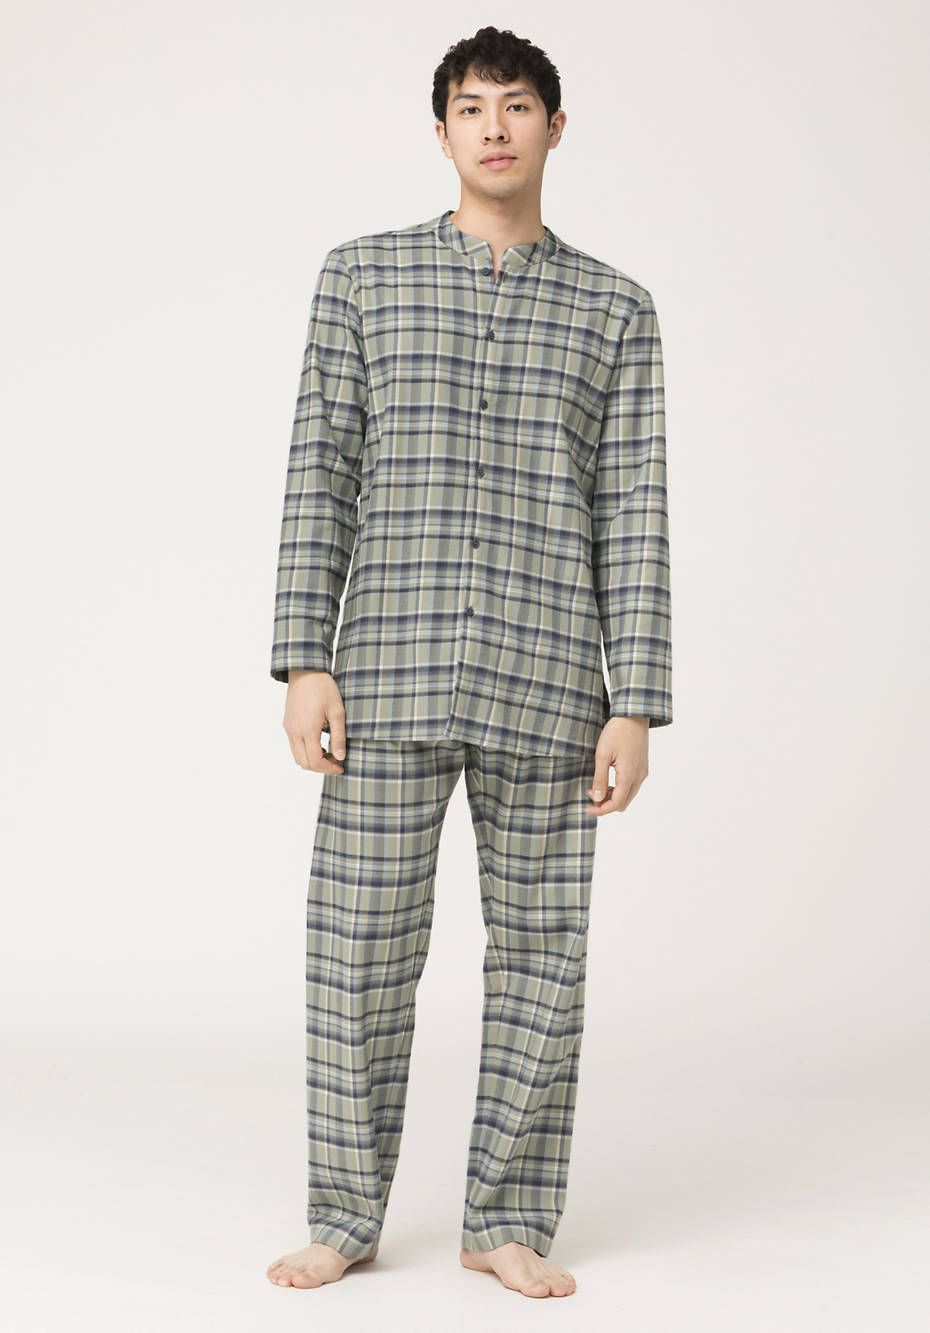 Flannel pajama pants made from pure organic cotton